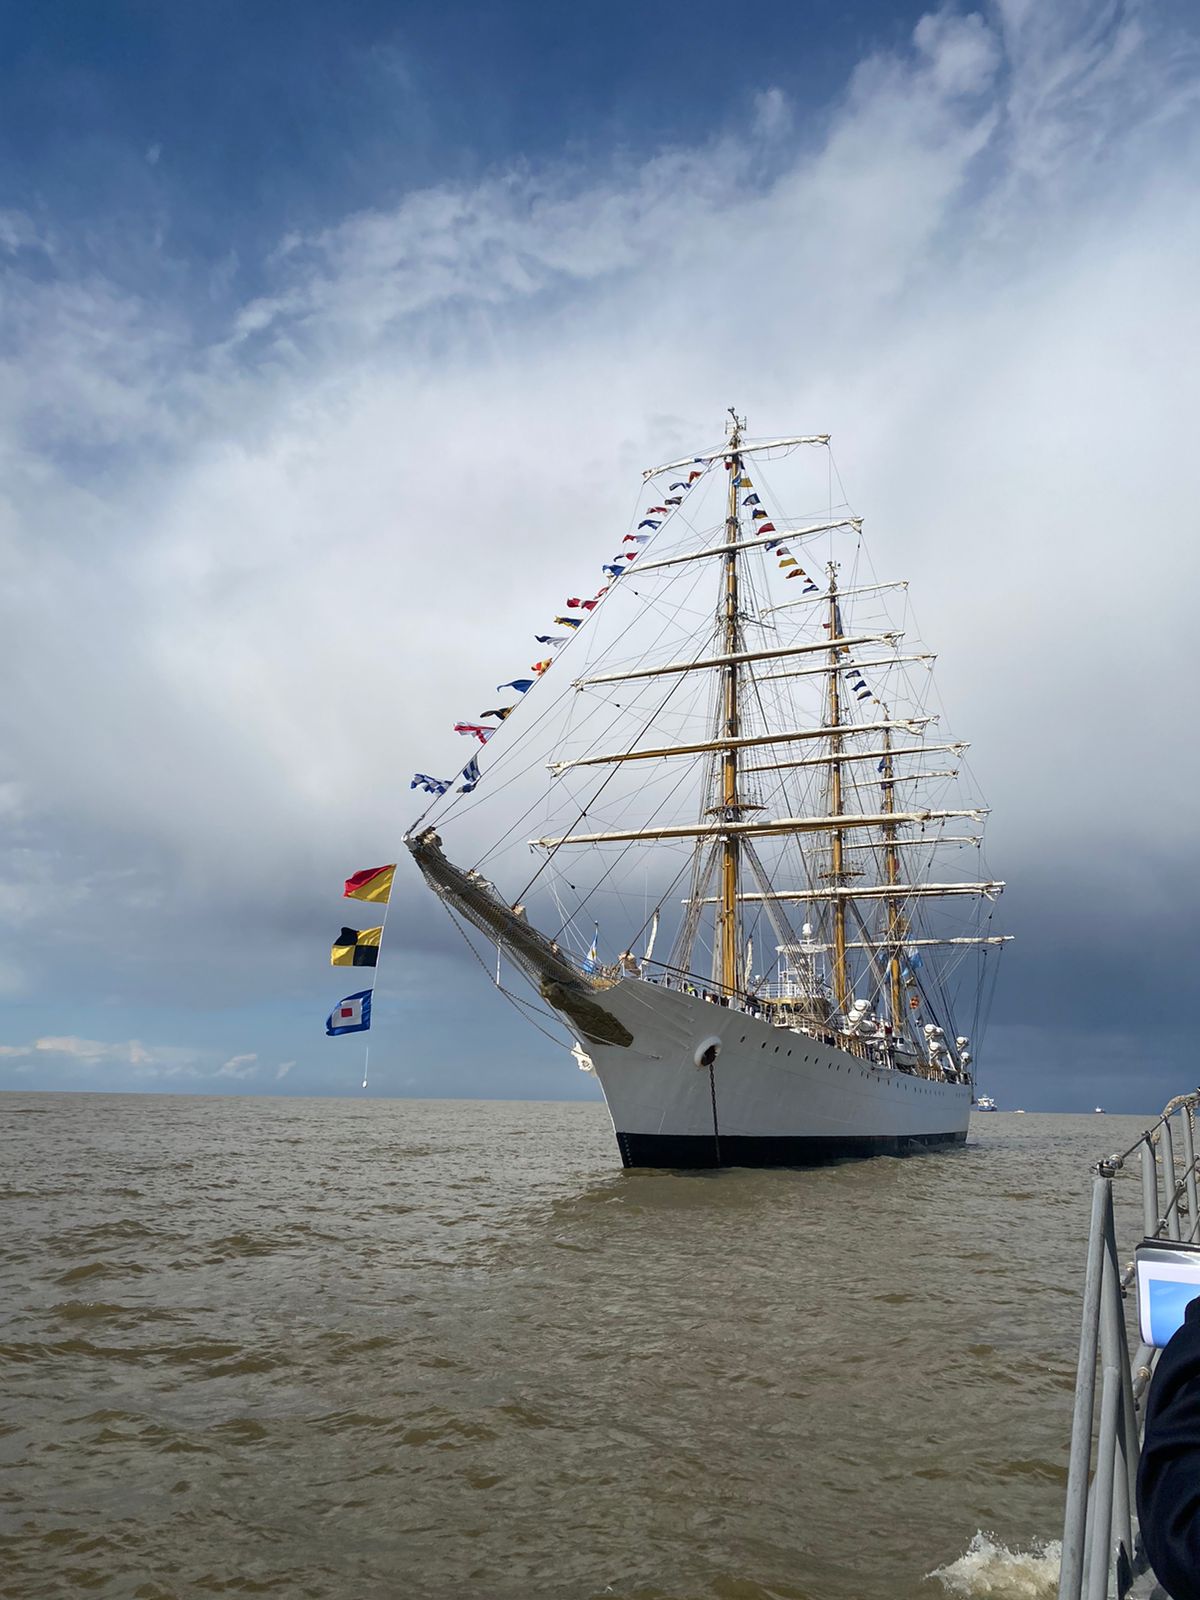 The Argentine Navy training ship has 326 crew members on board. 